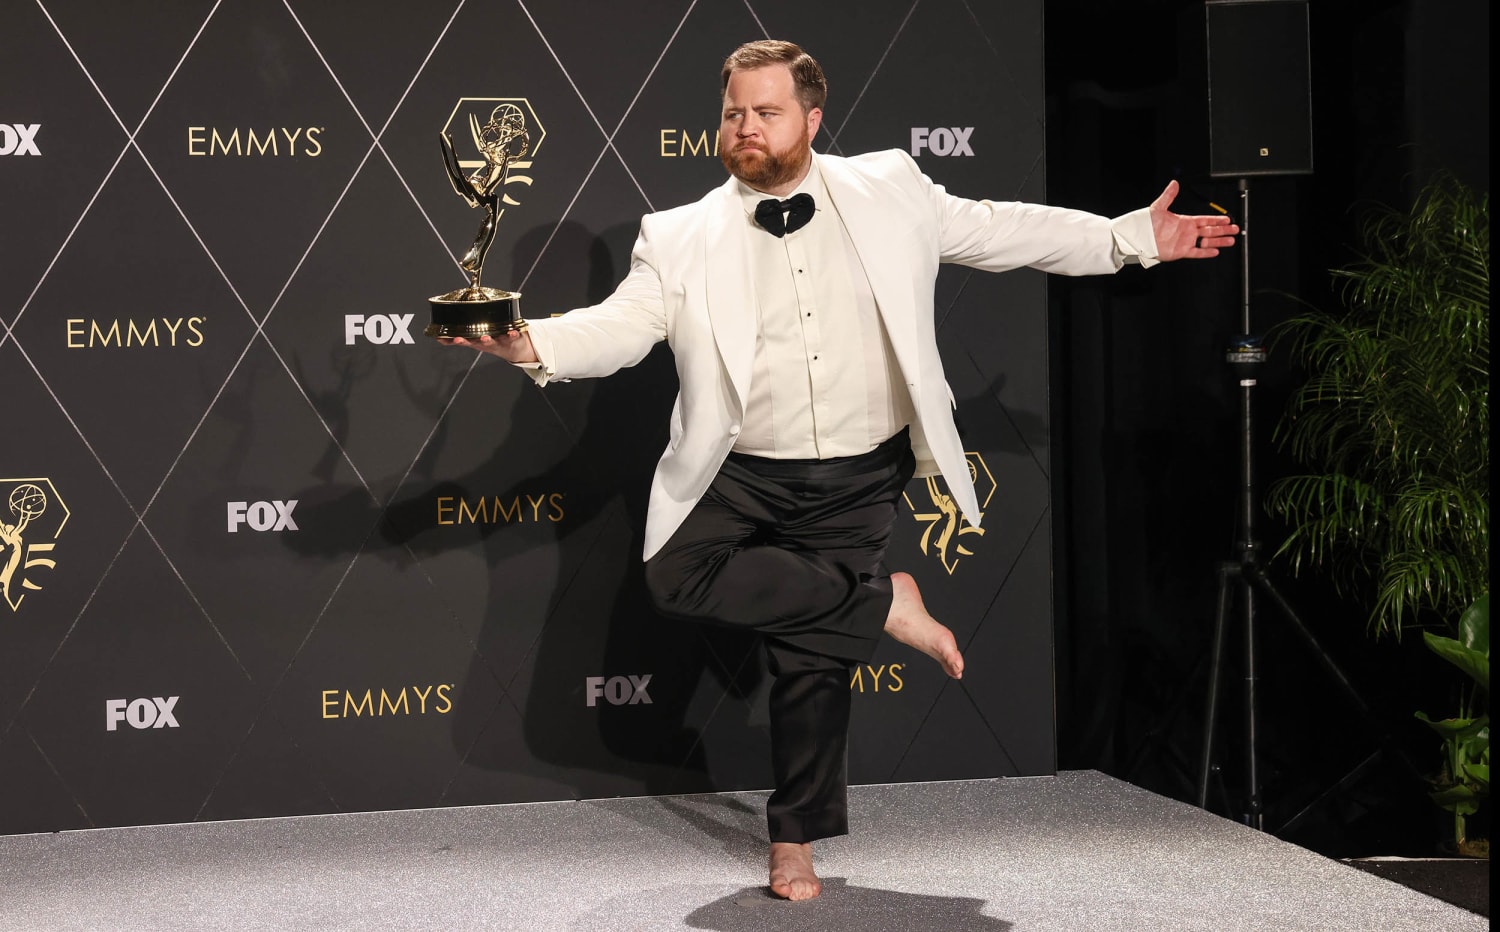 What Was Paul Walter Hauser Chewing Before Emmys Speech? We Found Out